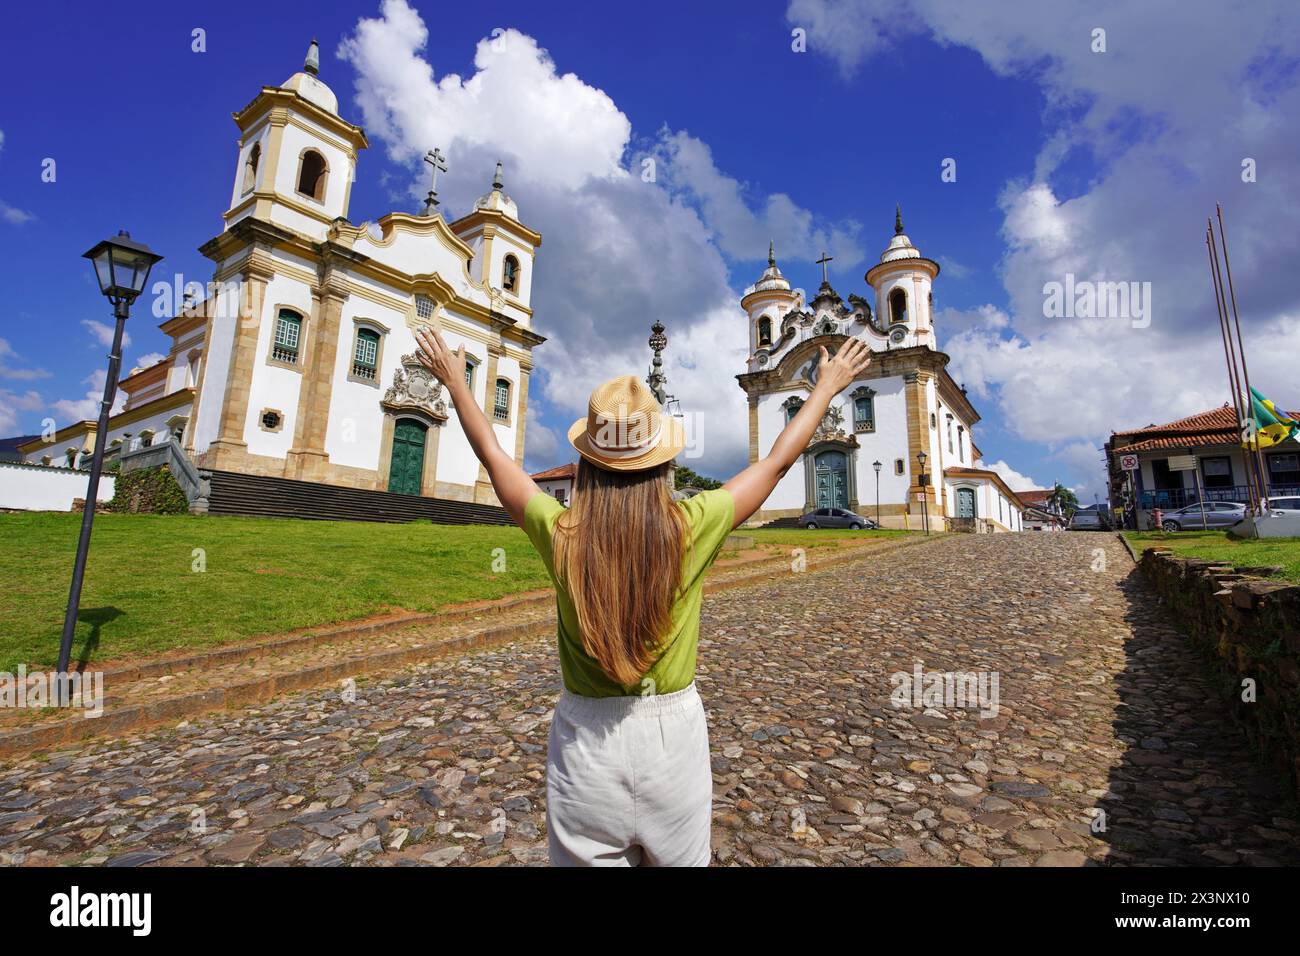 Tourism in Minas Gerais, Brazil. Traveler girl visiting historical town of Mariana with baroque colonial architecture, Brazil. Stock Photo